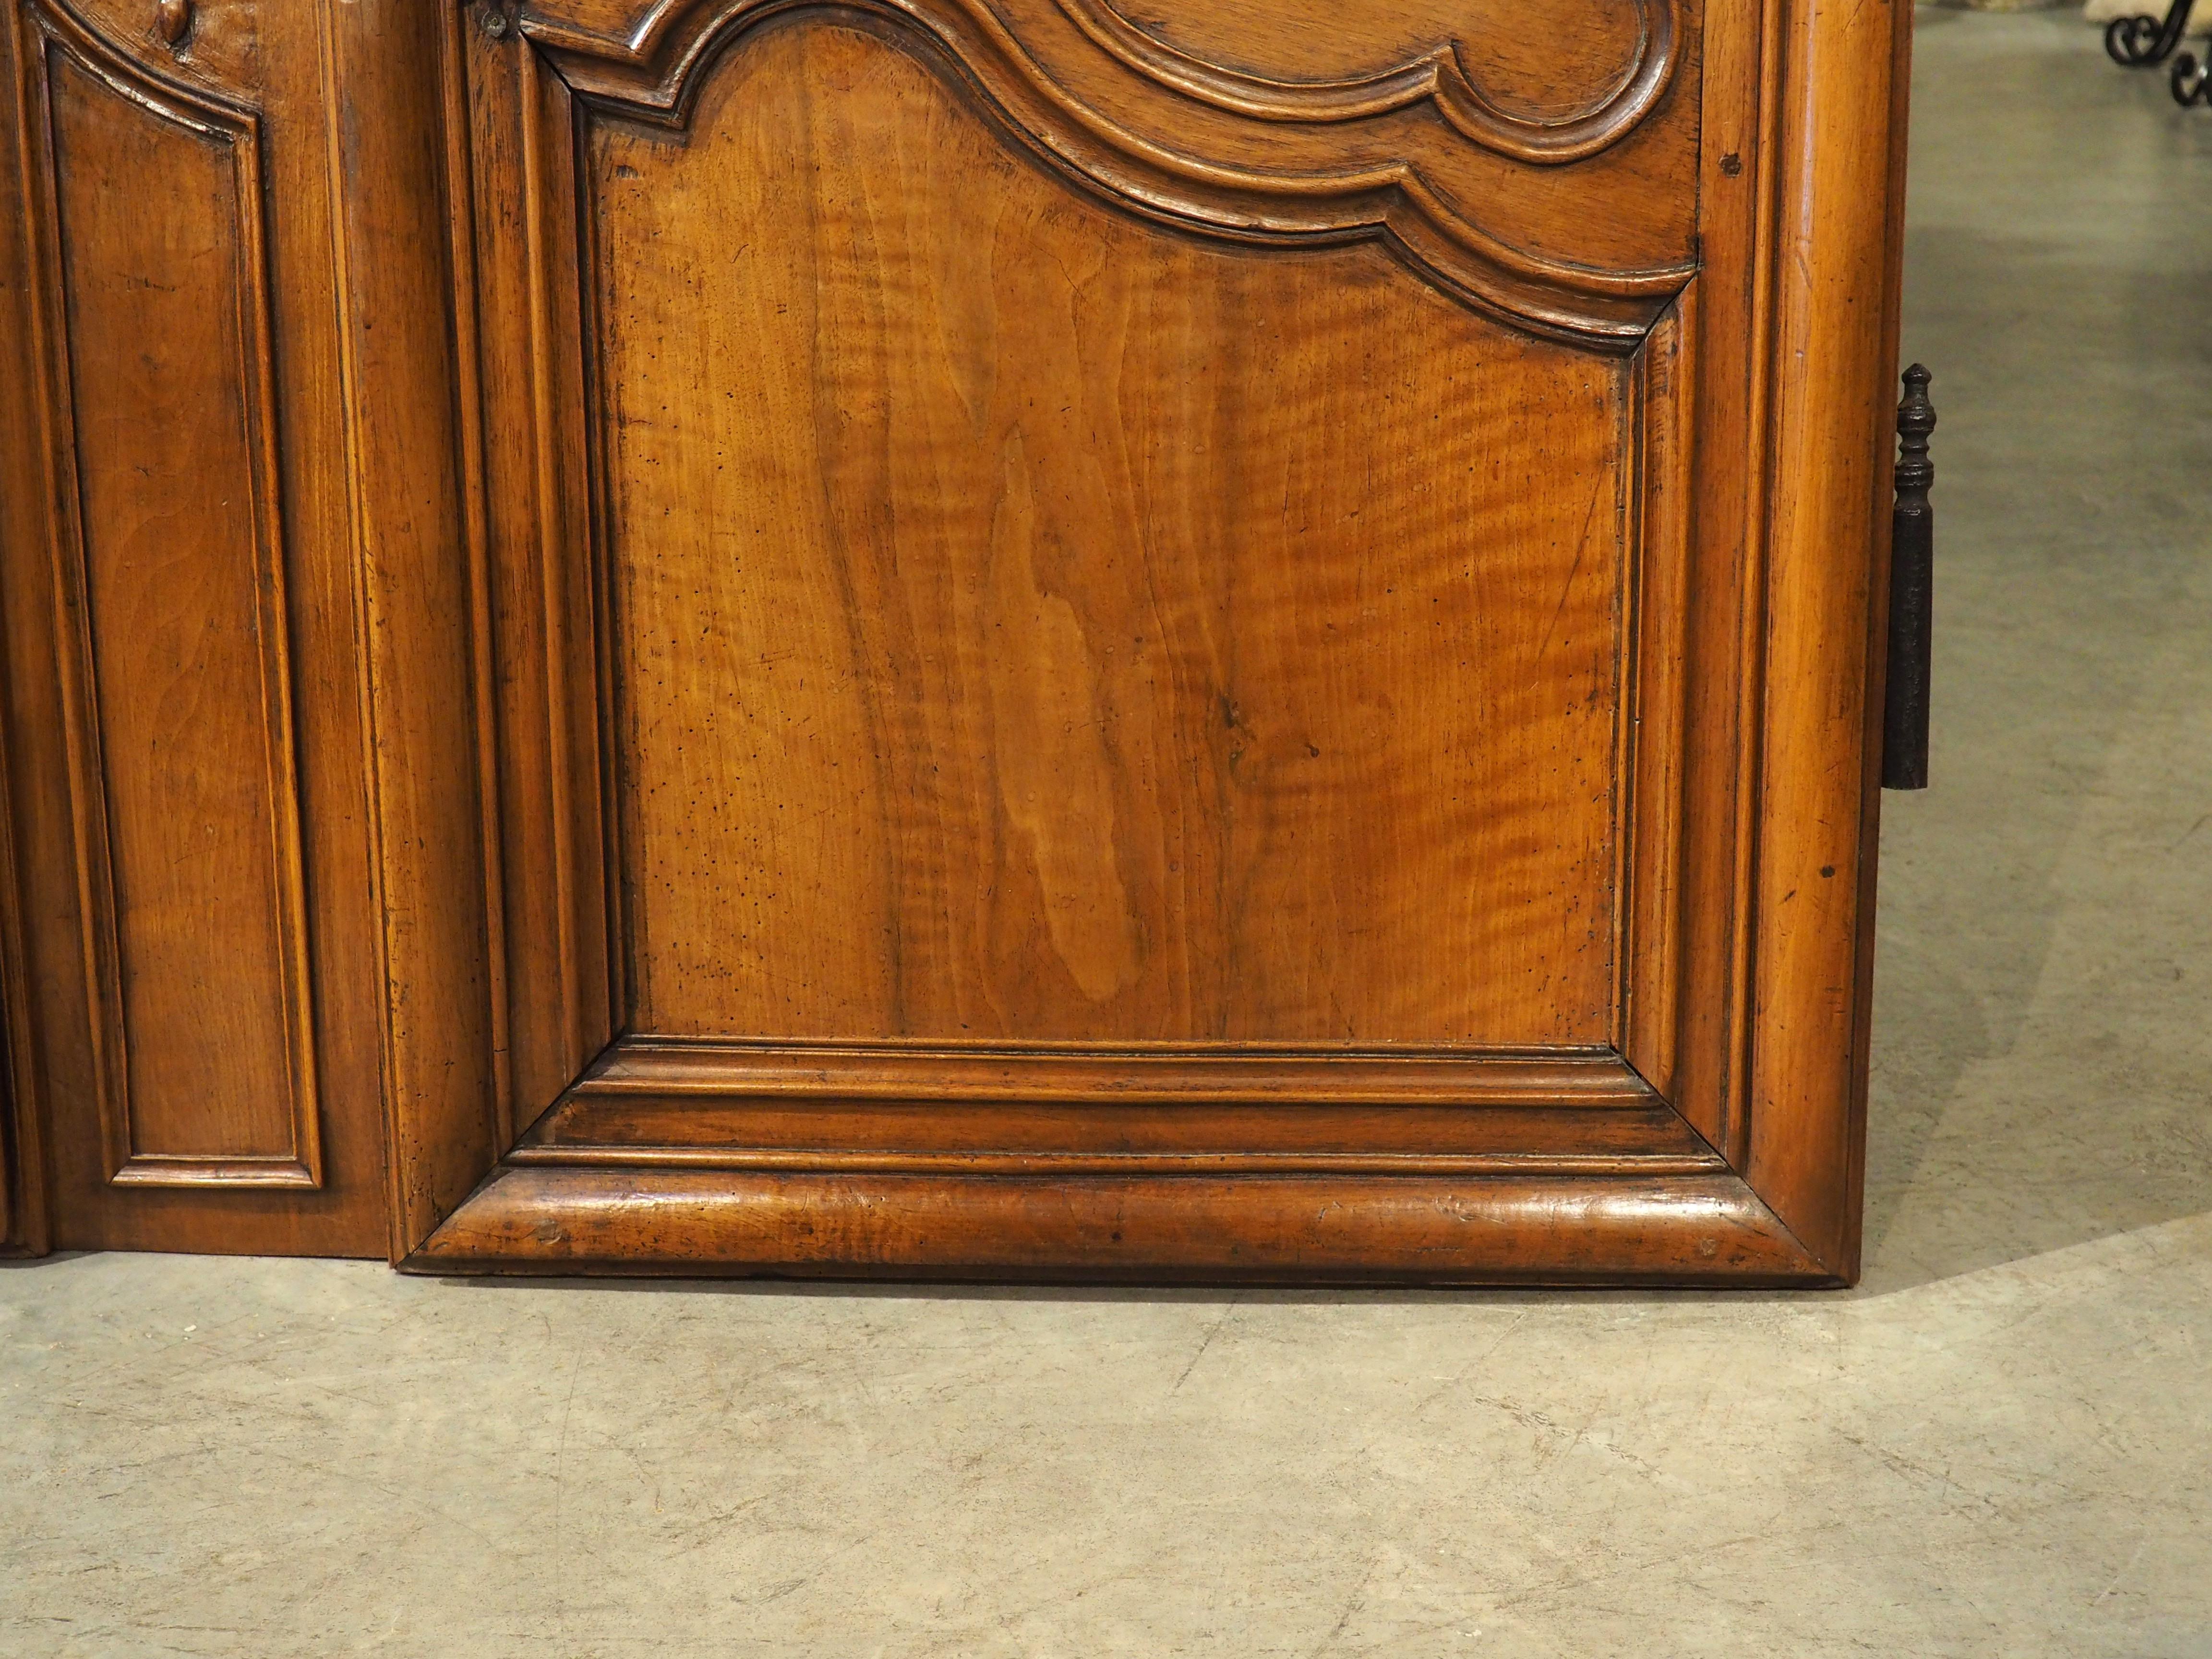 Pair of Circa 1750 Solid Walnut Façade or Cabinet Doors from Provence, France In Good Condition For Sale In Dallas, TX